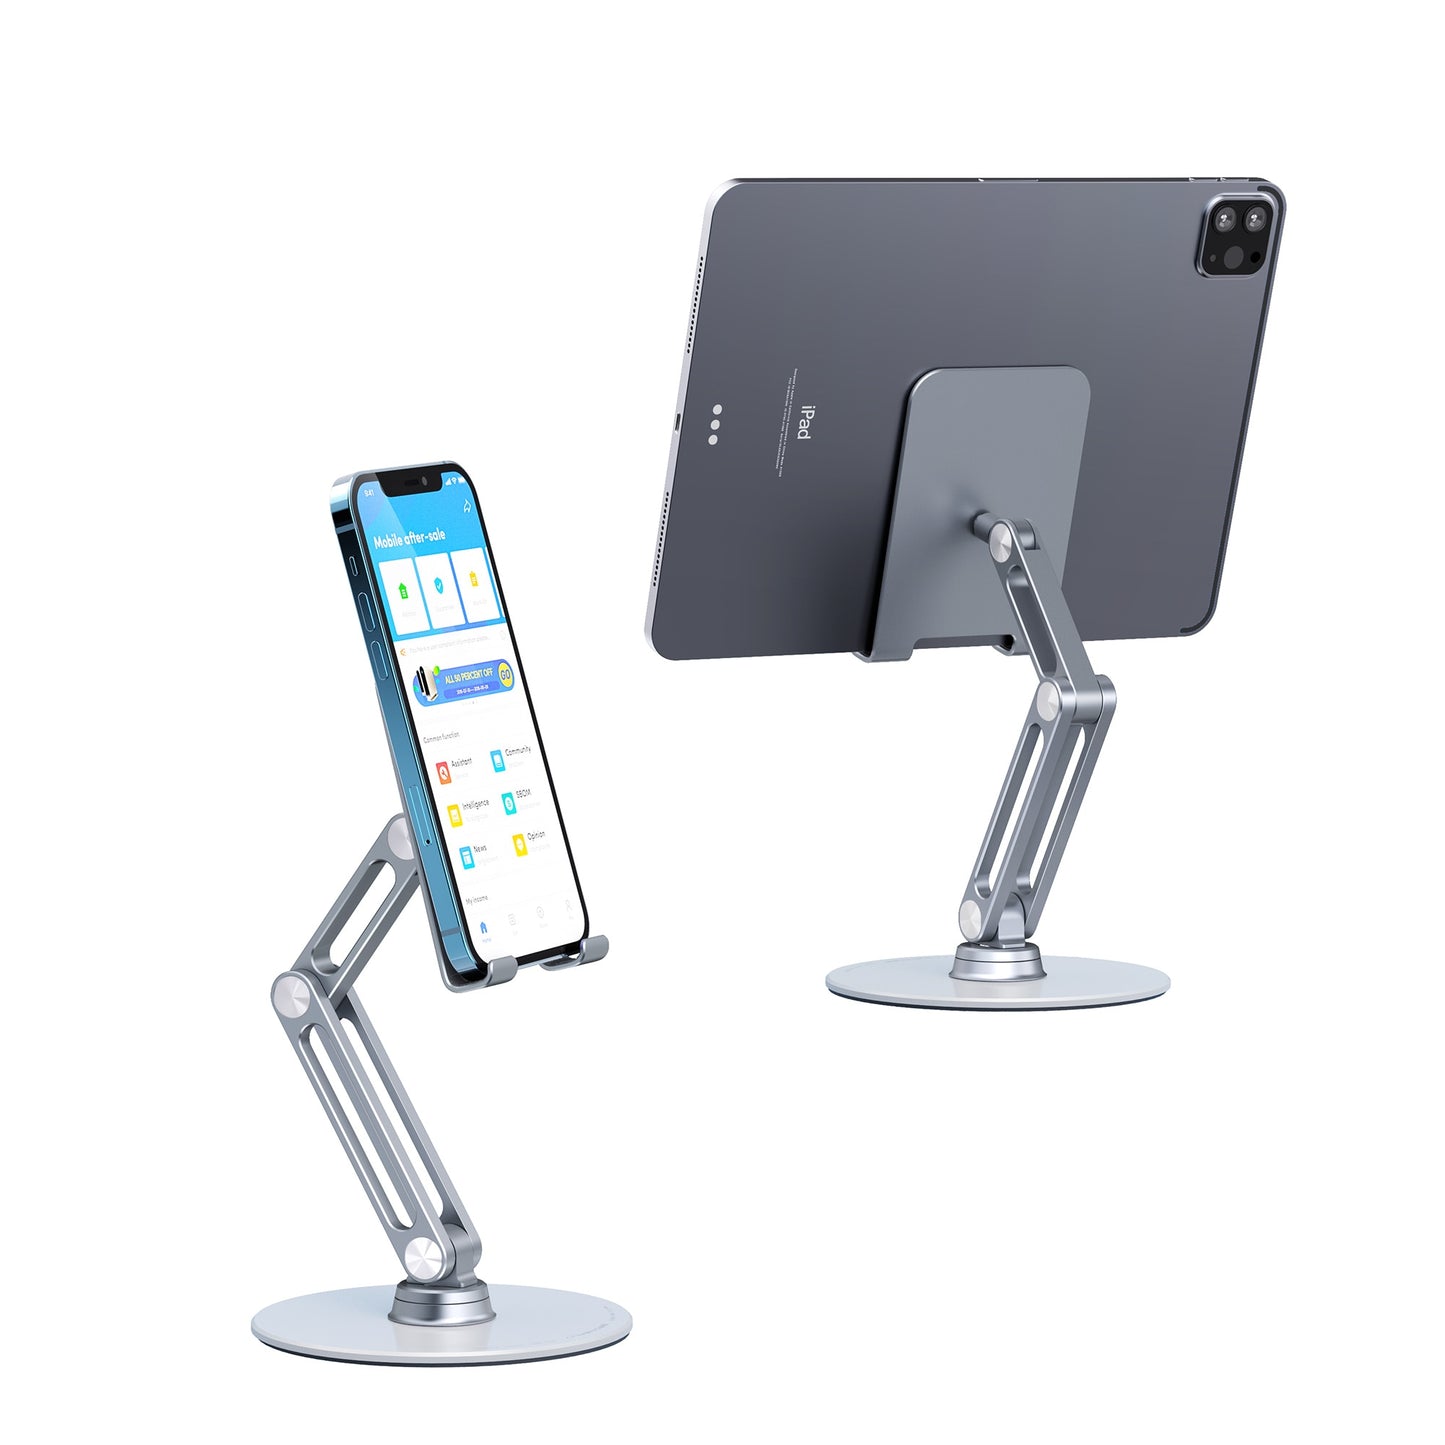 Kimdoole Metal 360° Rotating Tablet Holder Stand Use for Ipad Laptop Cellphone Smartphone Mobile Phones Telephone Reader